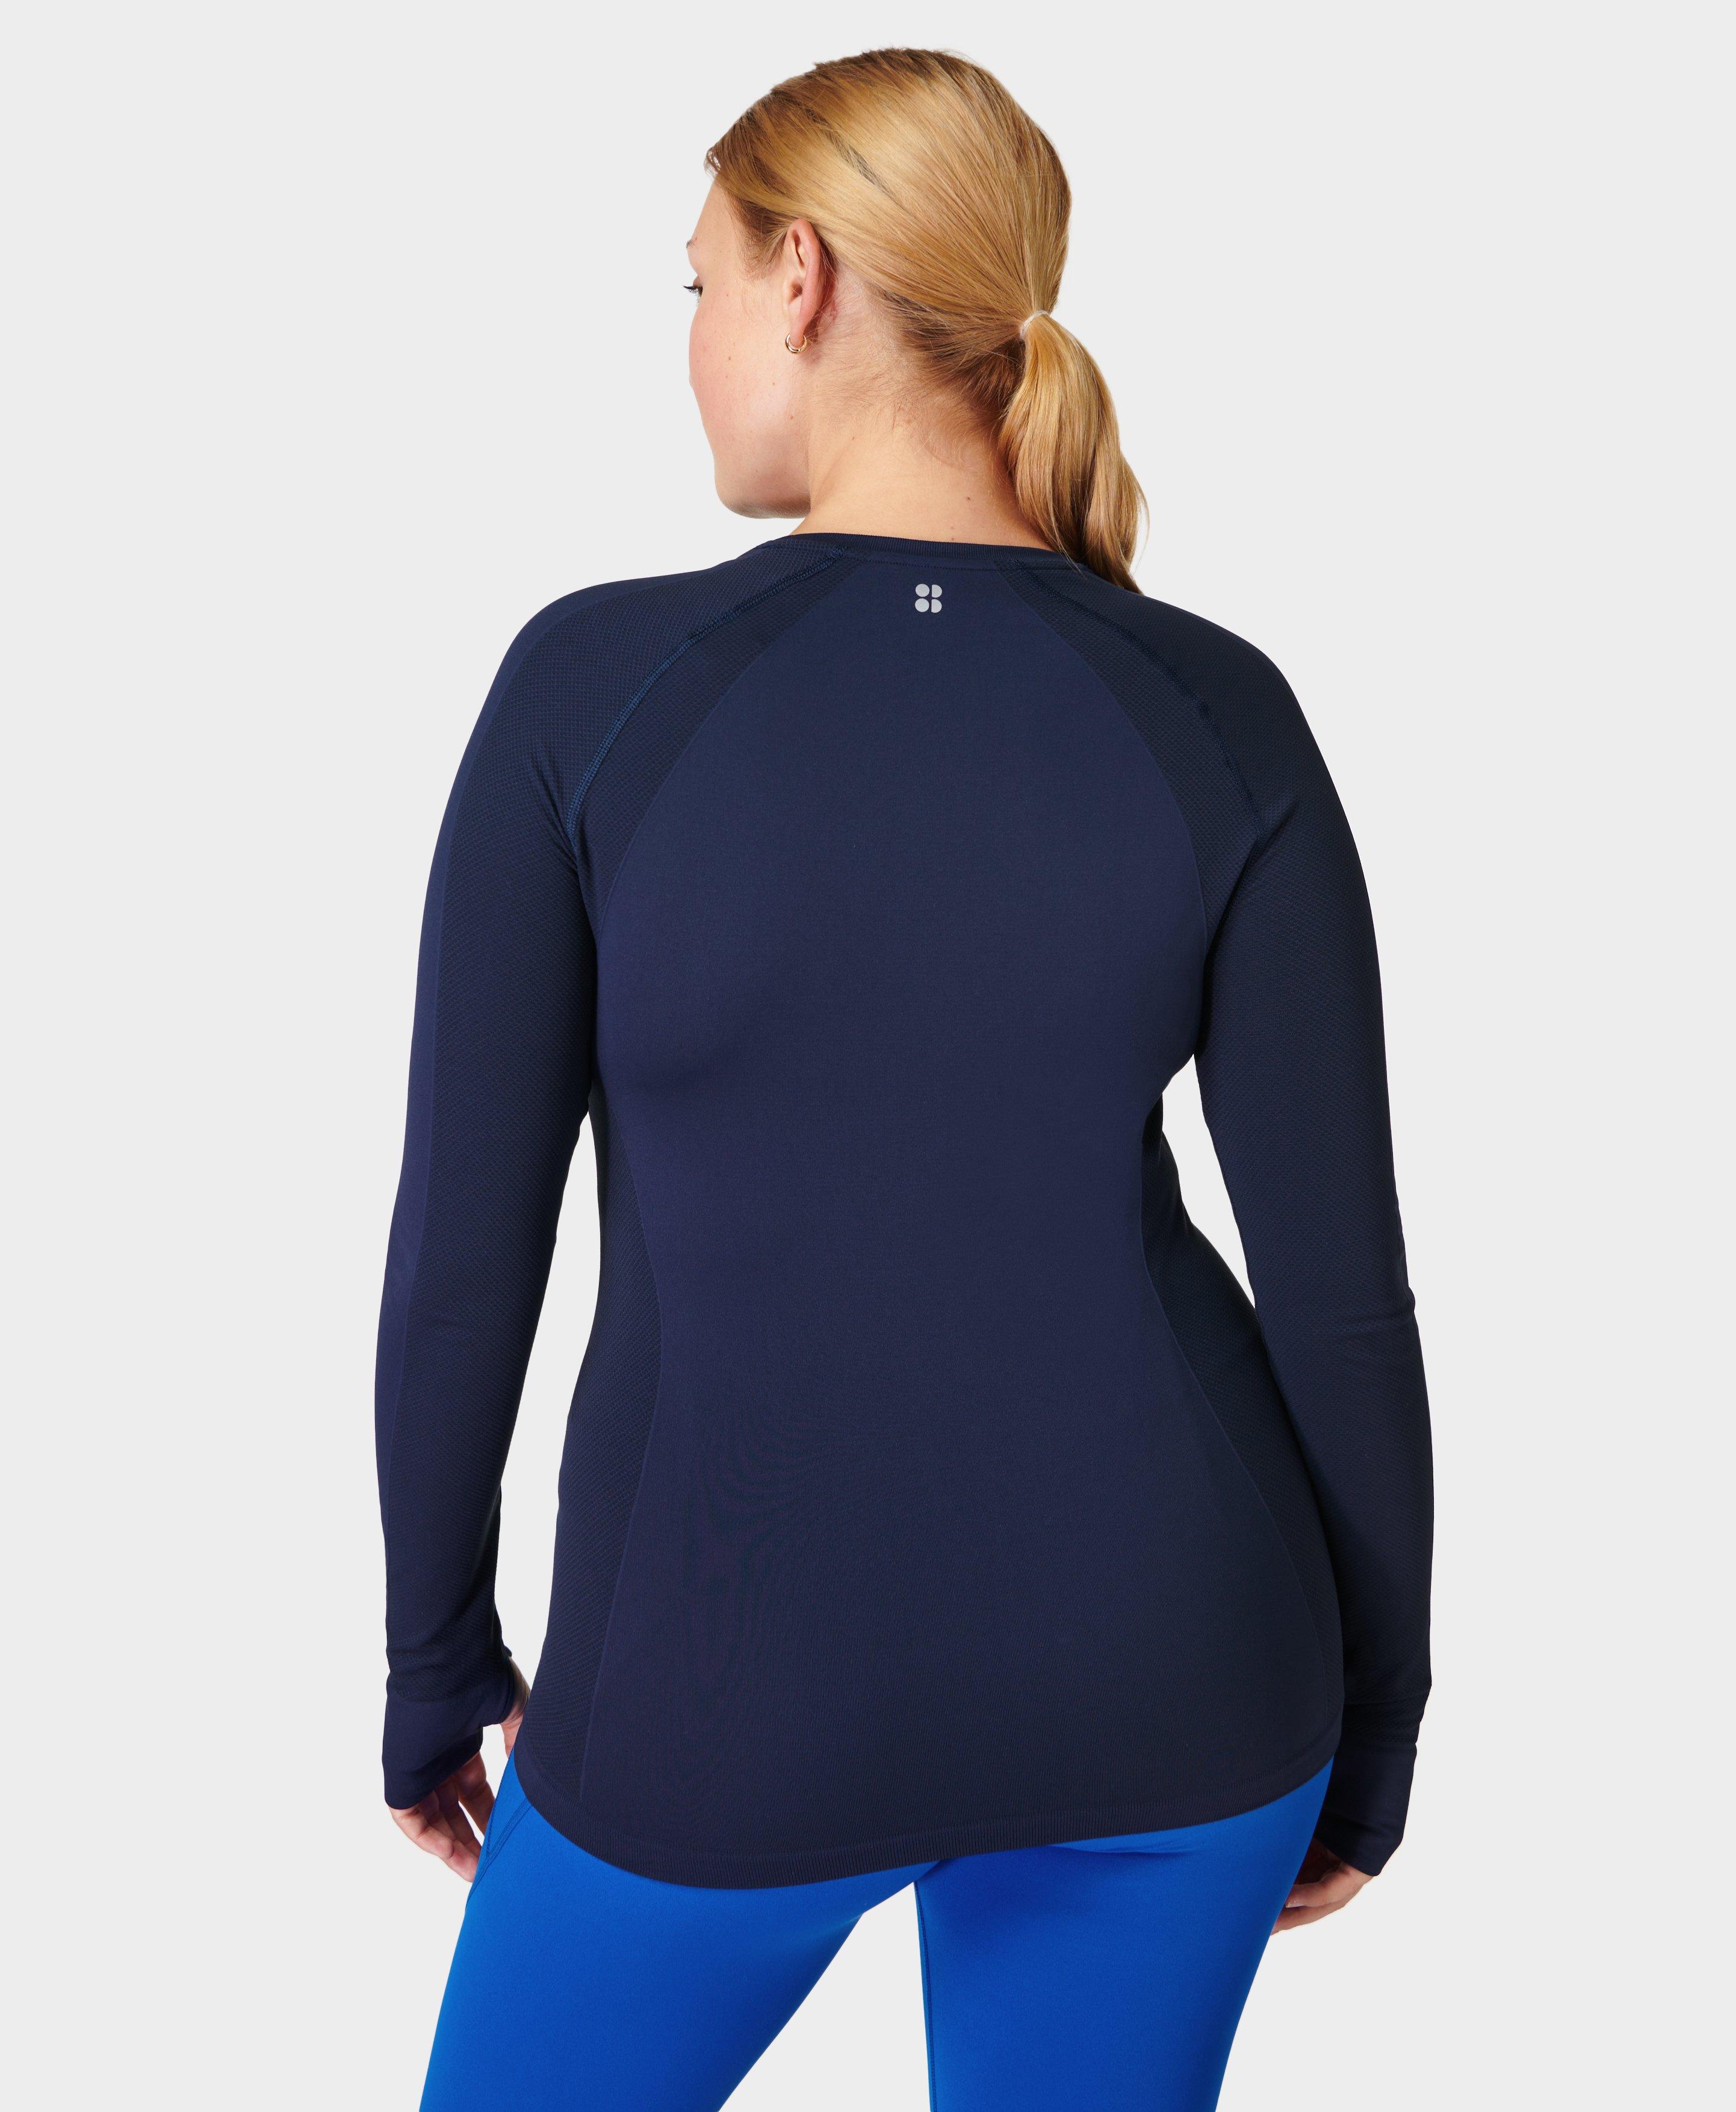 Athlete Seamless Workout Long Sleeve Top - Navy Blue